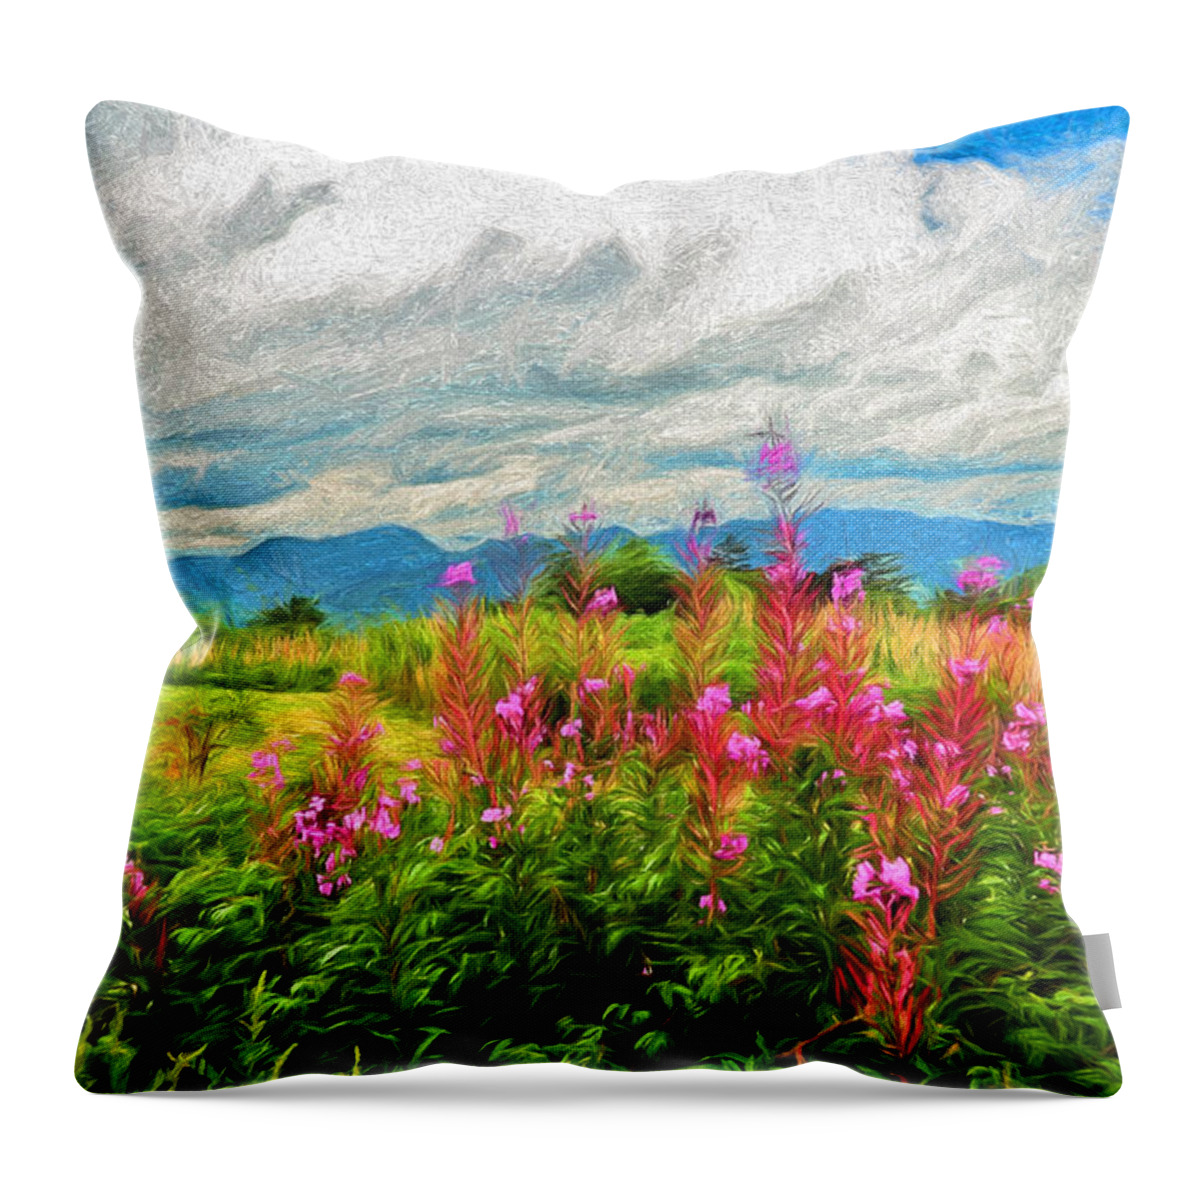 White Mountains Throw Pillow featuring the painting White Mountains View by Mitchell R Grosky